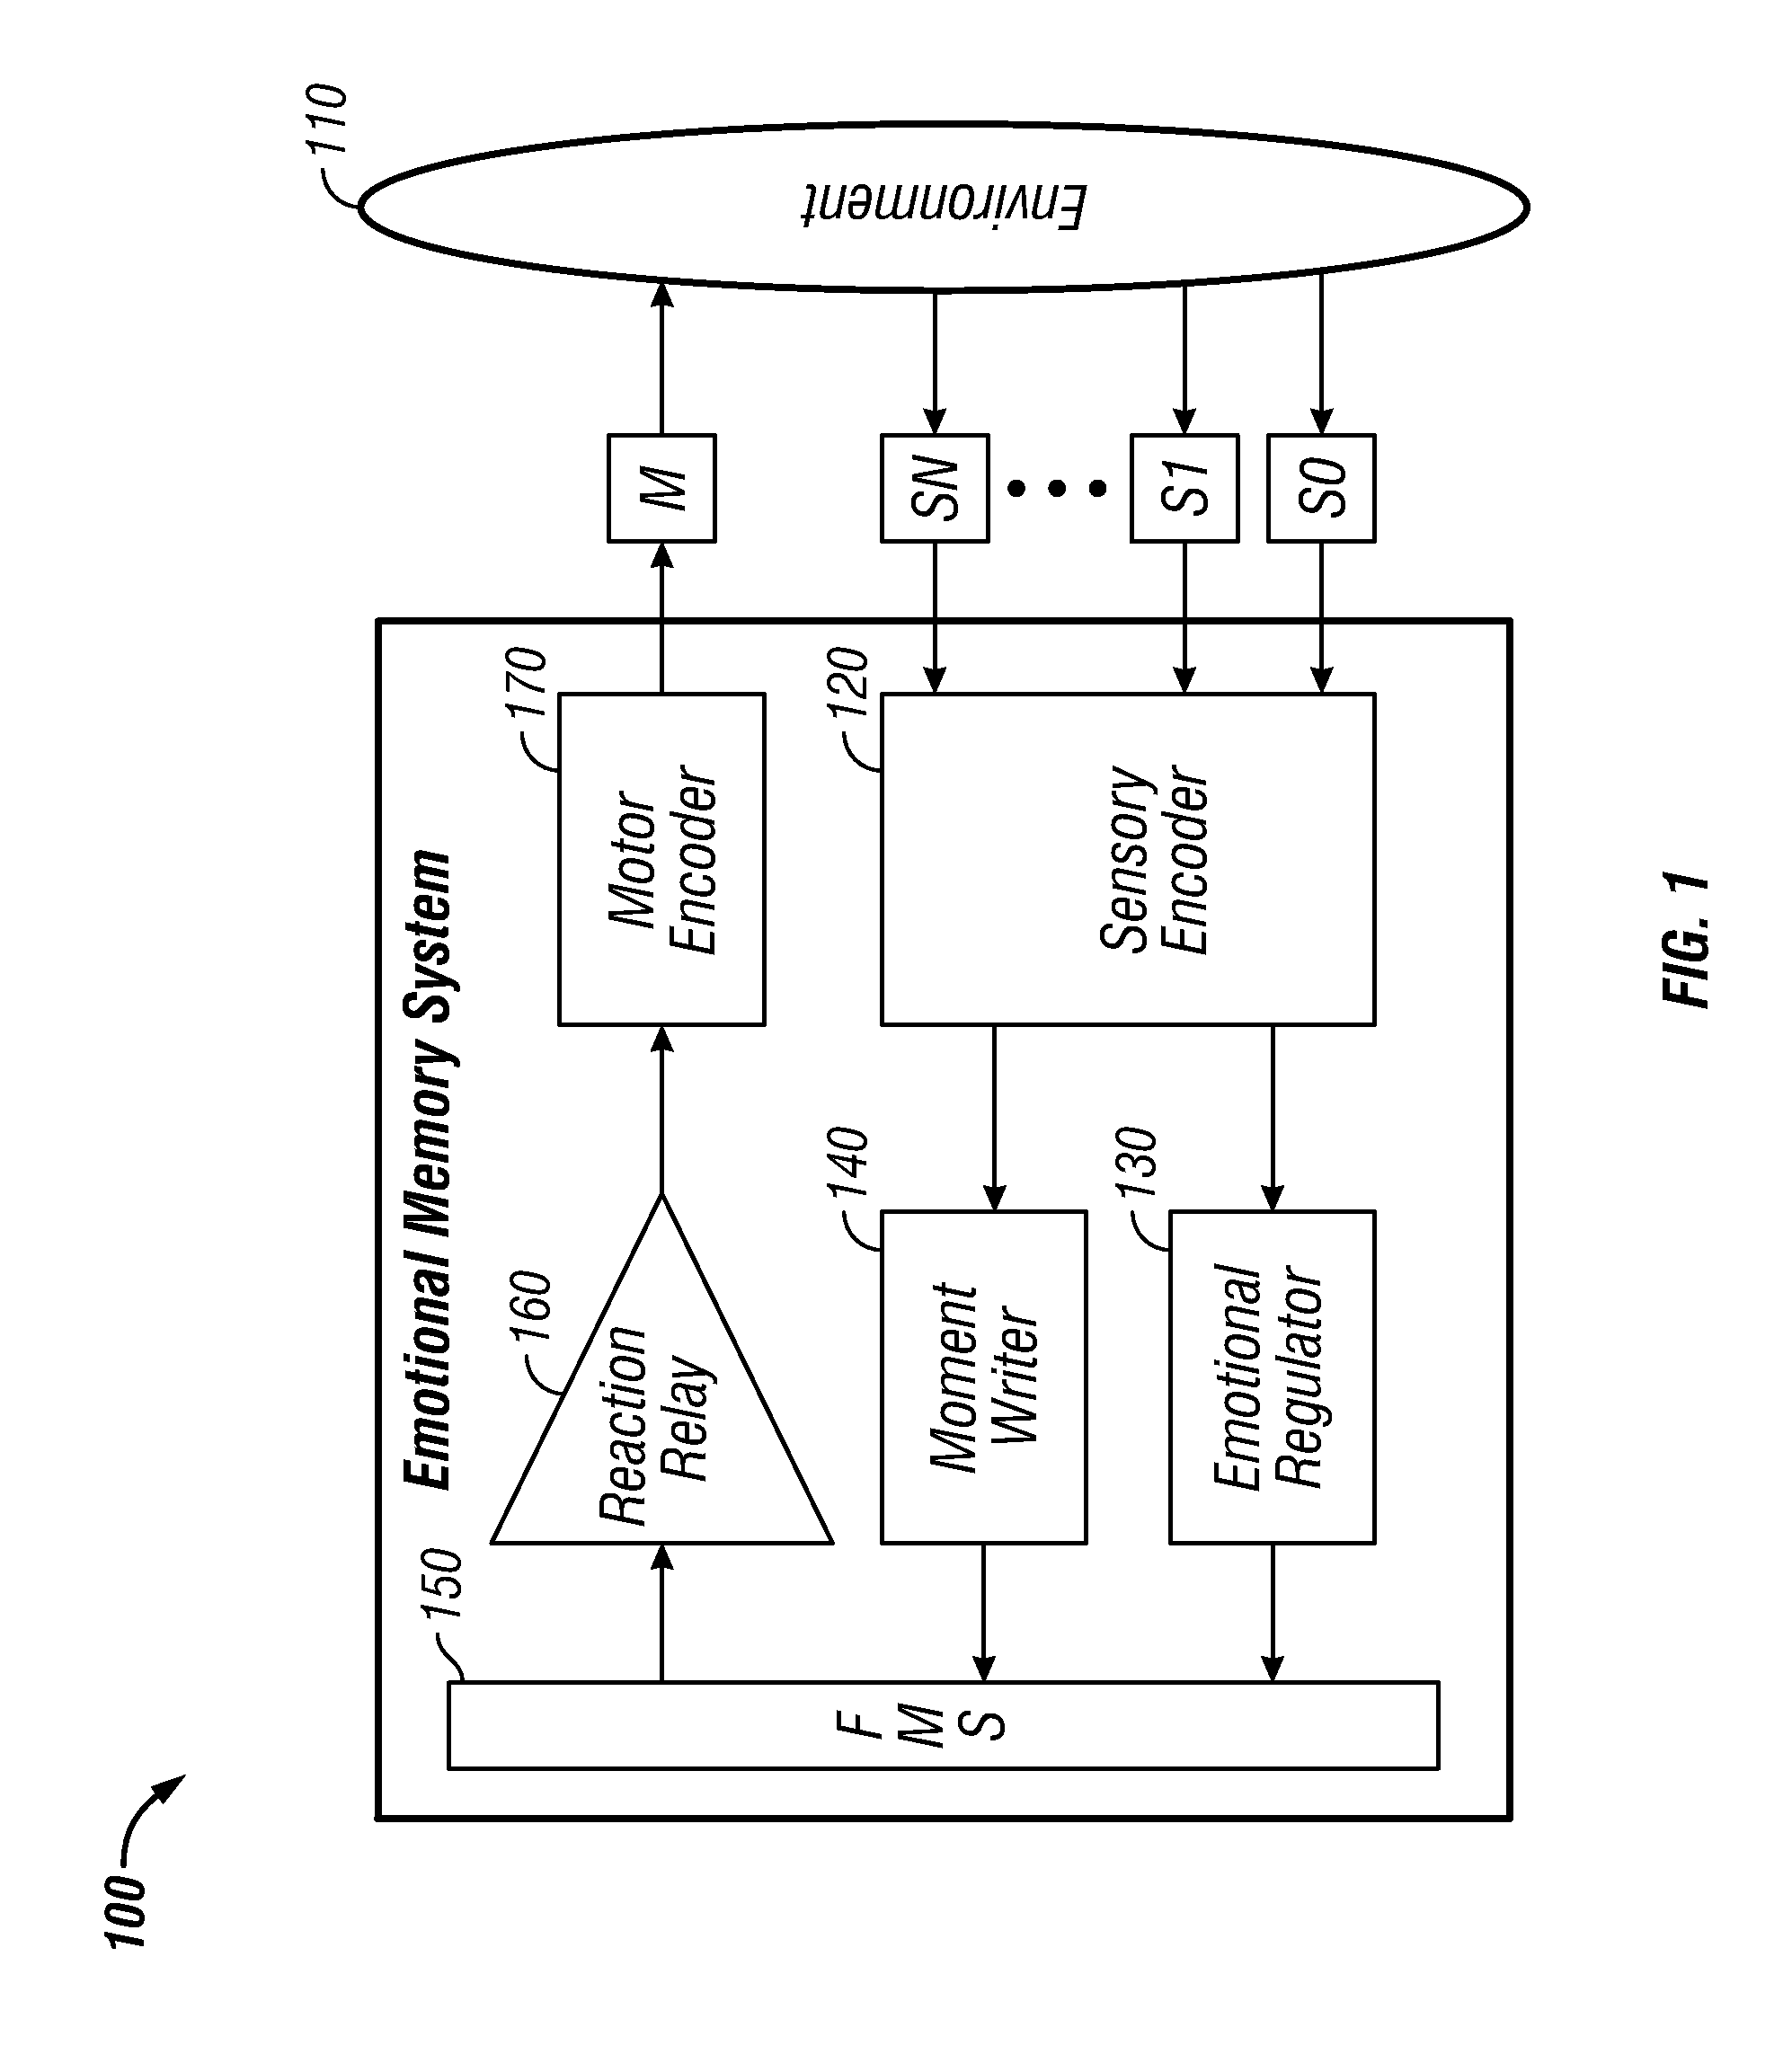 Watershed memory systems and methods